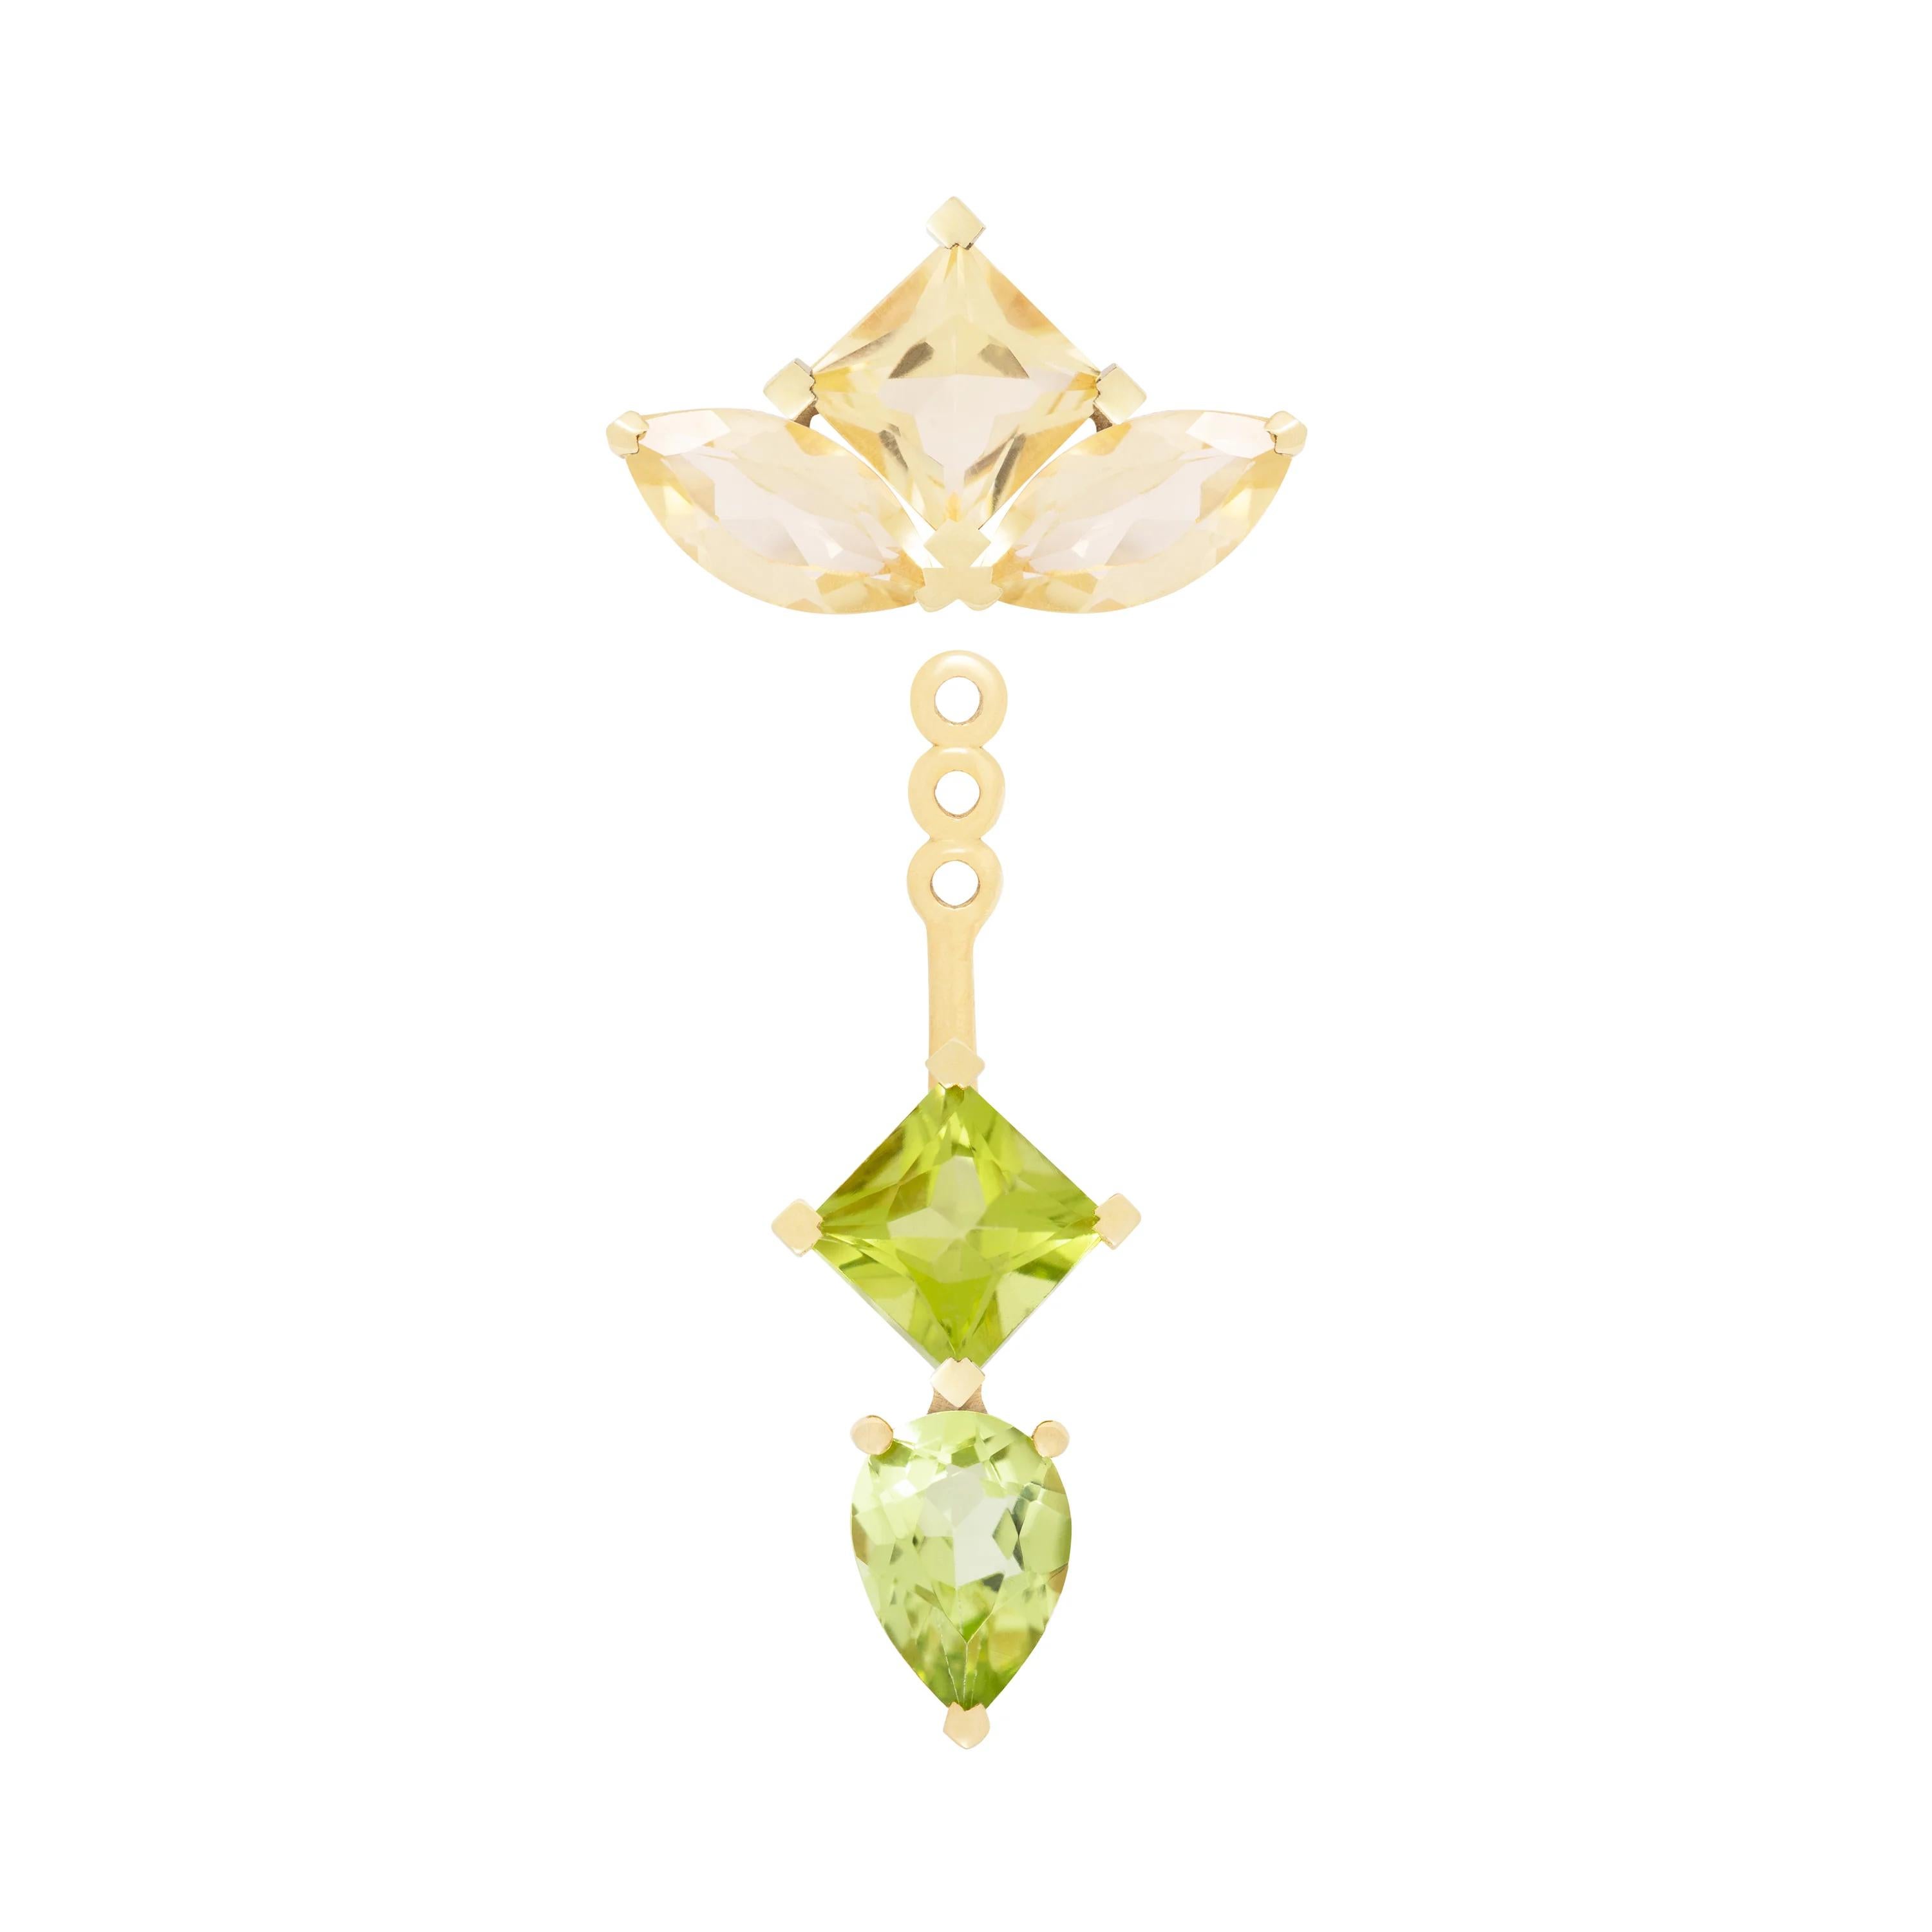 18k yellow gold earring jackets in 3.02ct lemon quarts and peridot.

Sold as single, these detachable earring jackets offer the perfect opportunity to elevate your style and mix and match with your favorite earrings.

